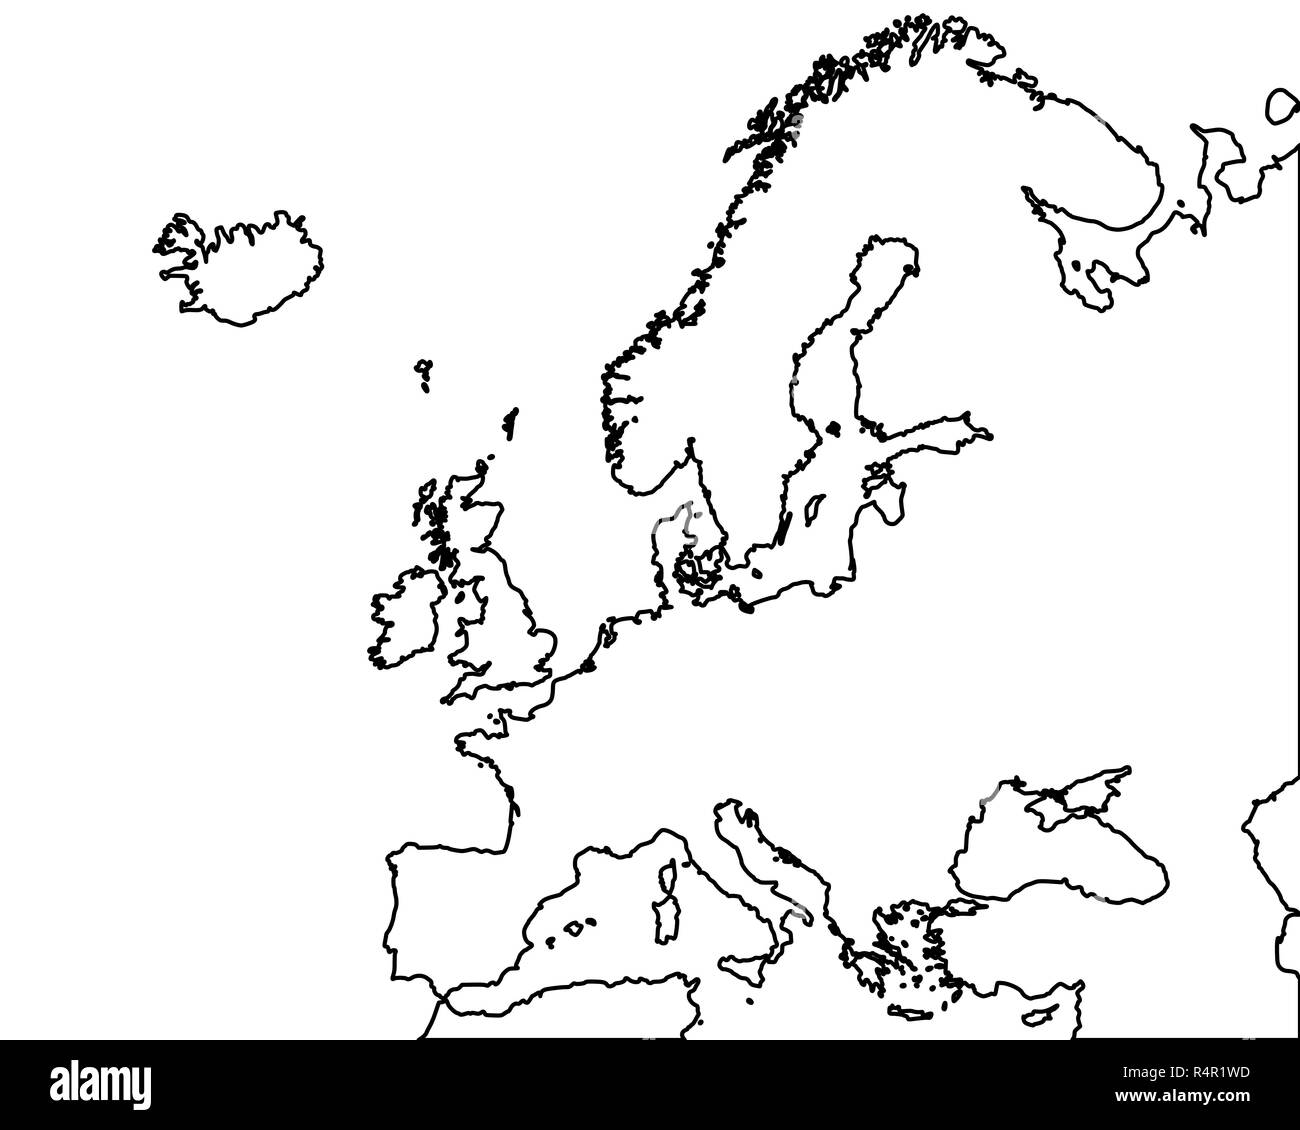 map of europe Stock Photo